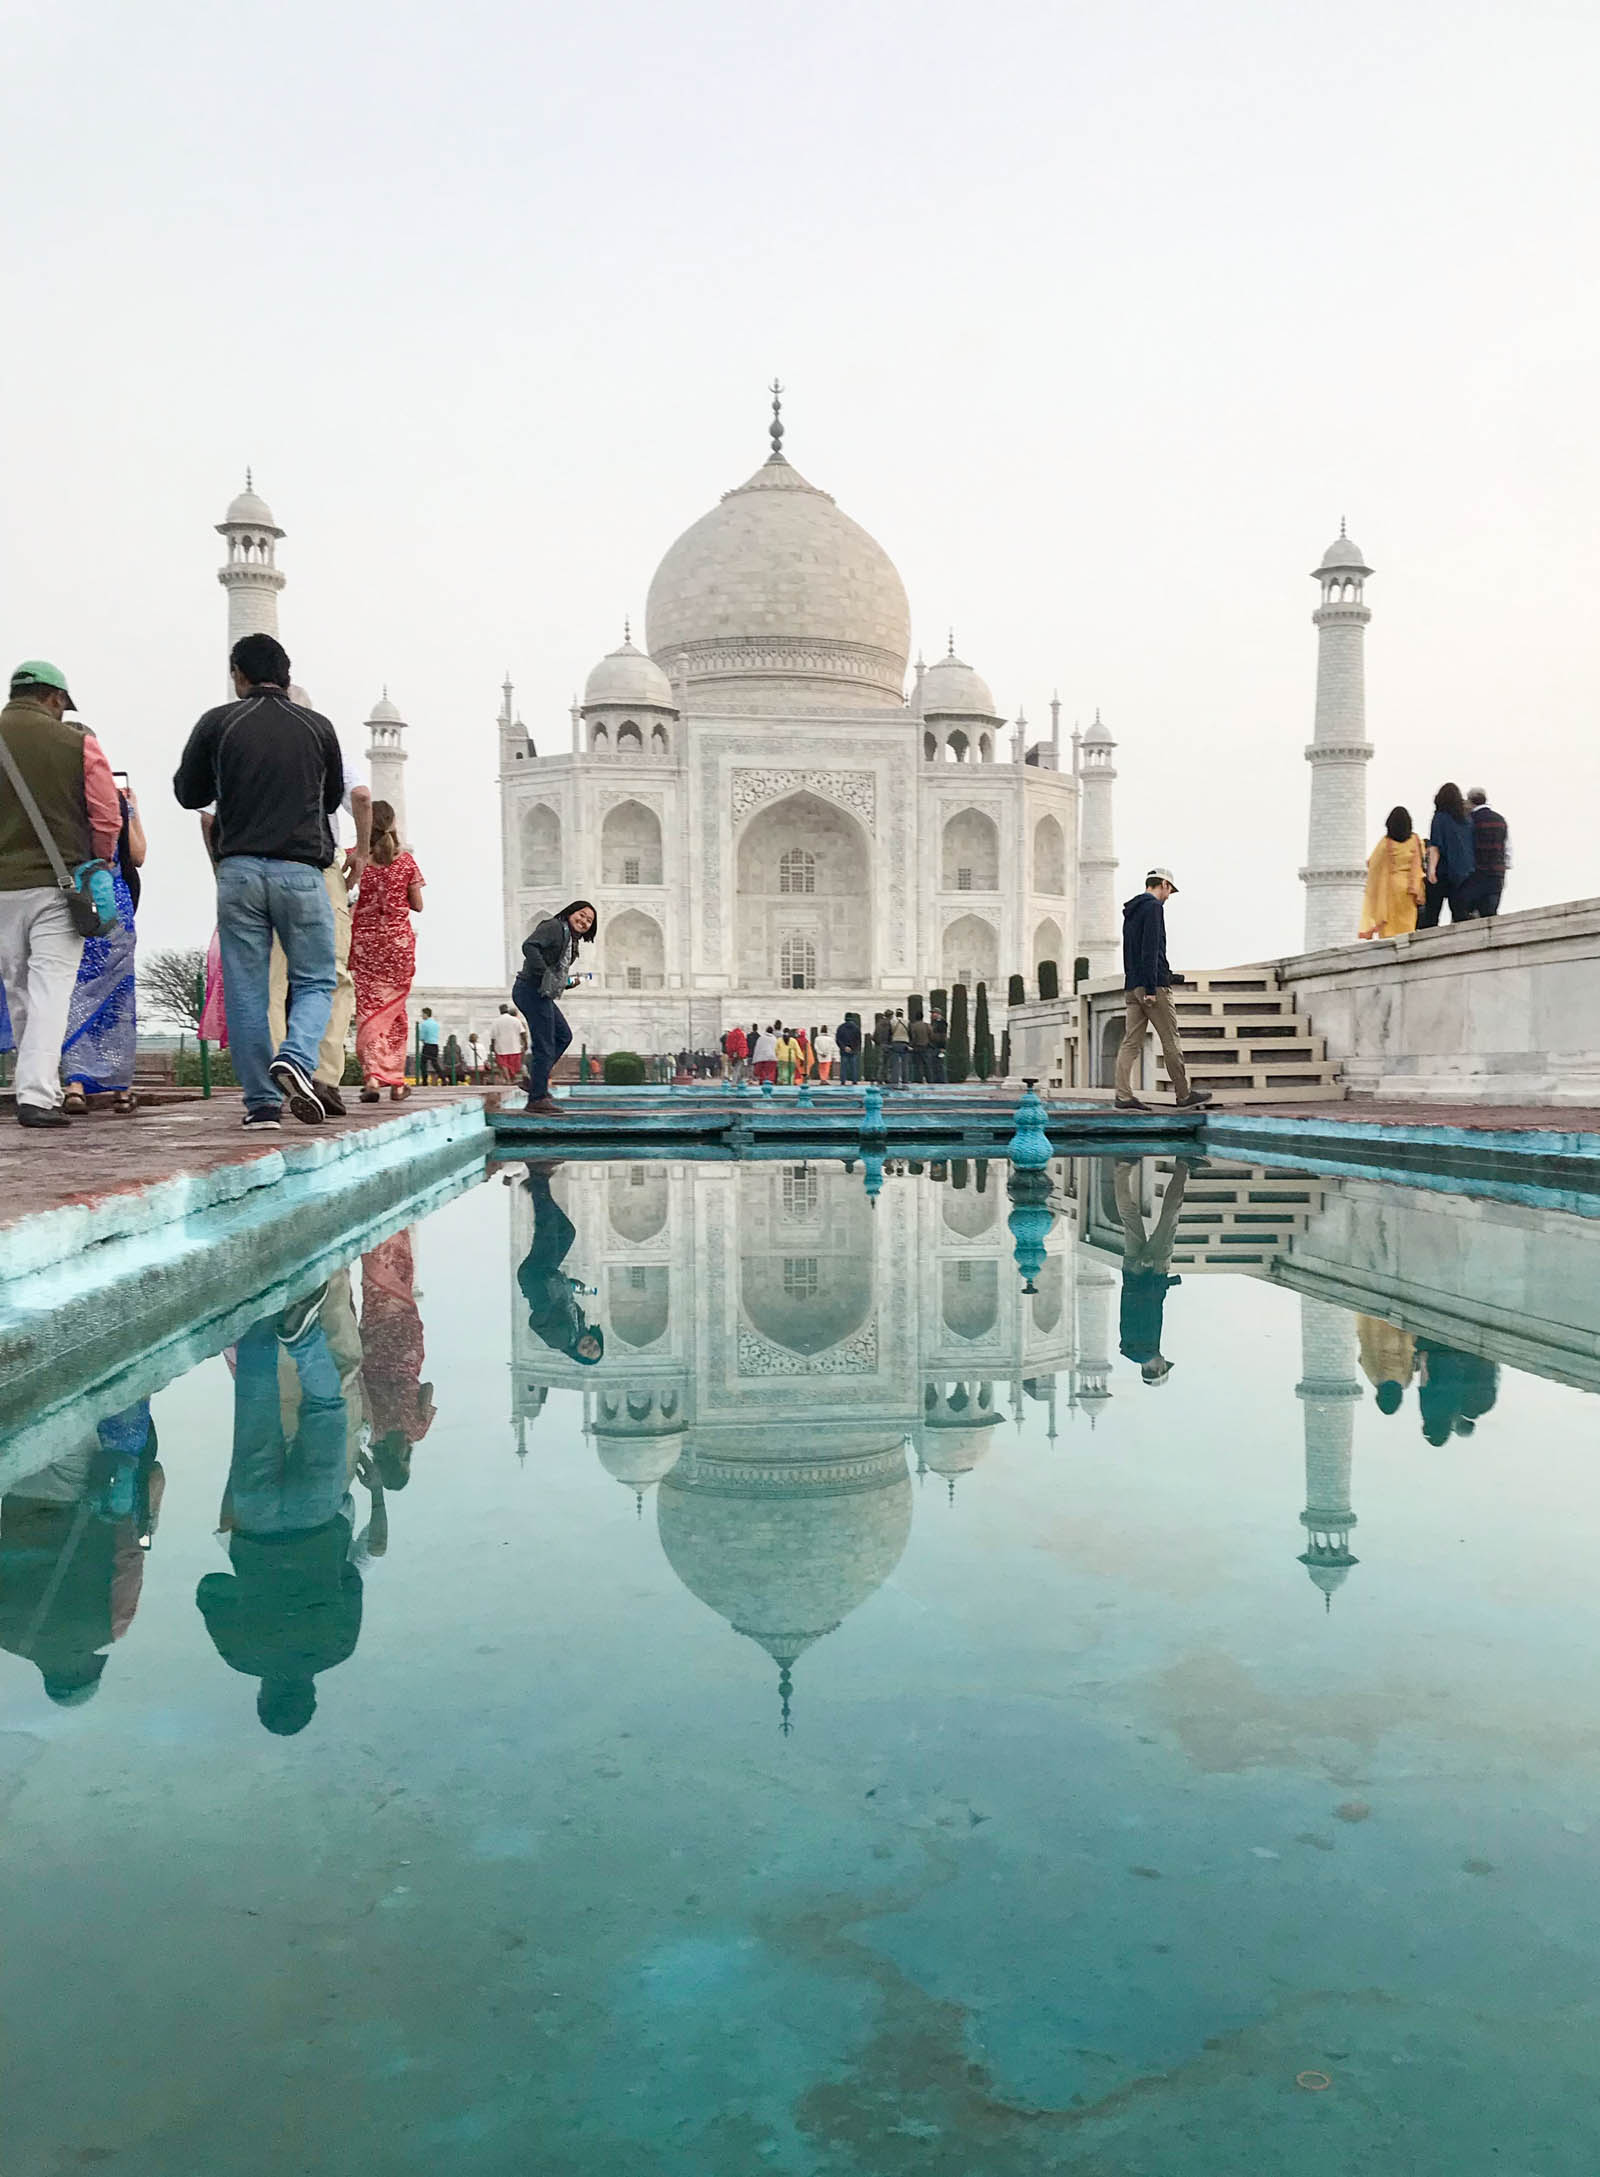 Tiffany perfects the art of the photo bomb while Priscilla perfects the art of the Taj reflection shot